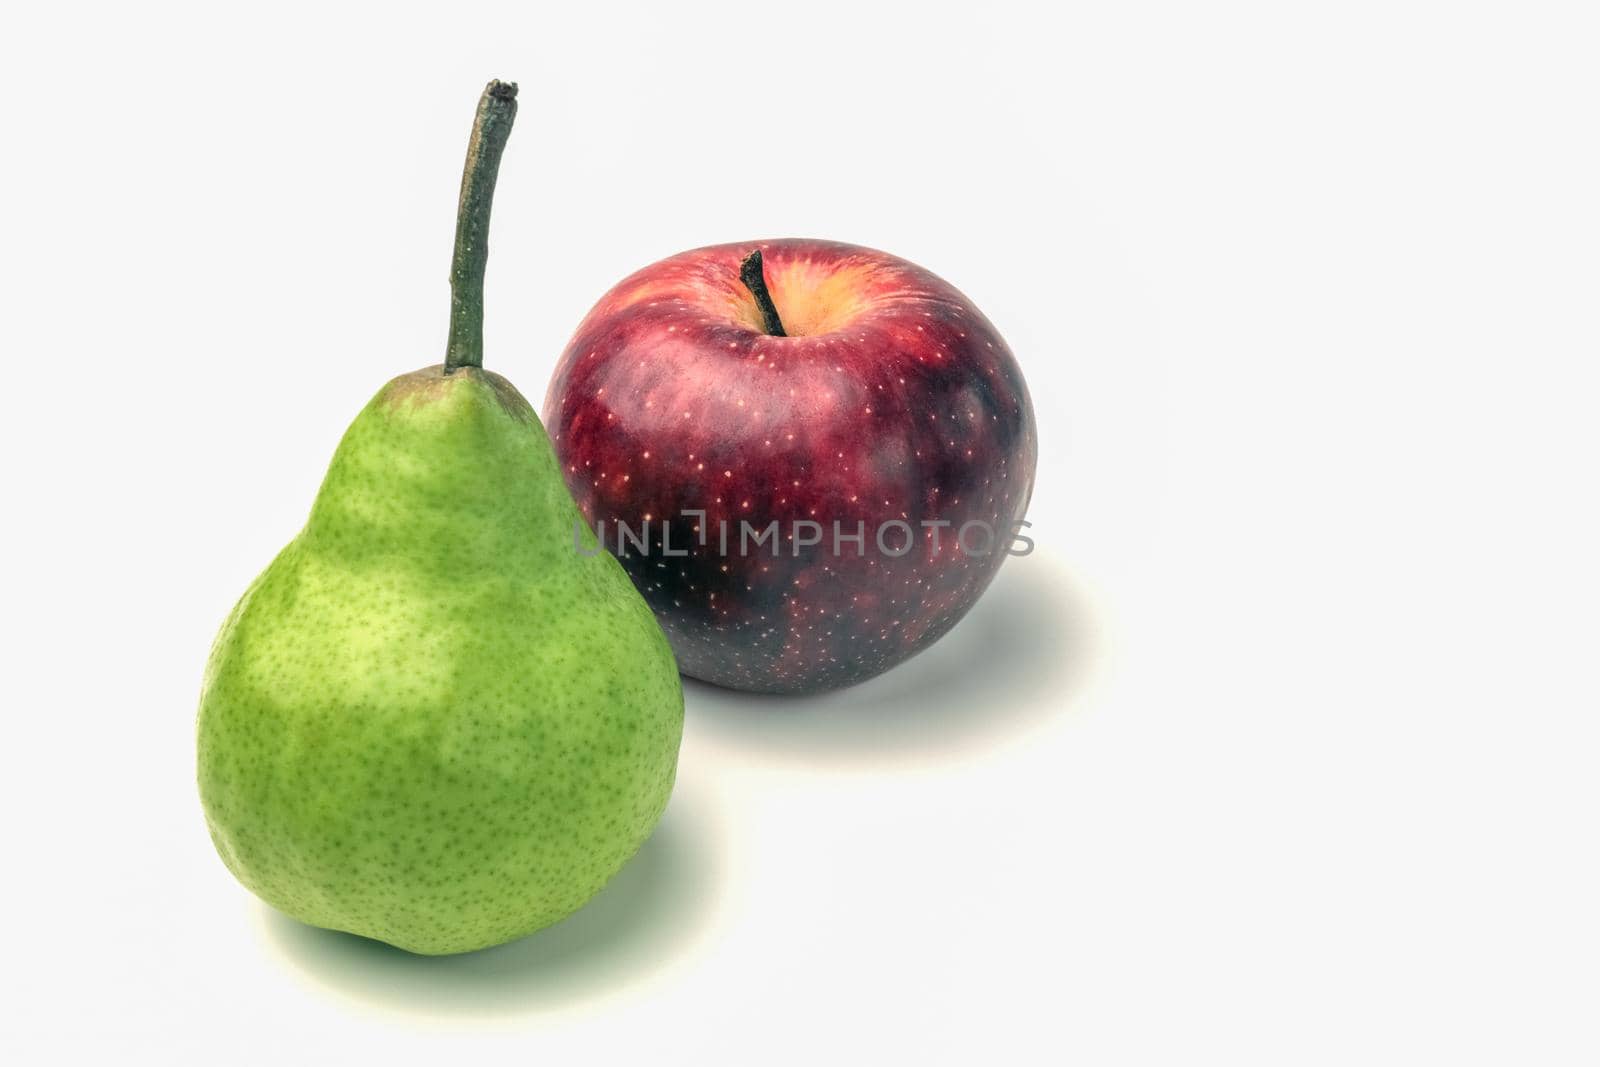 green pear and red Apple close up on white background. High quality photo